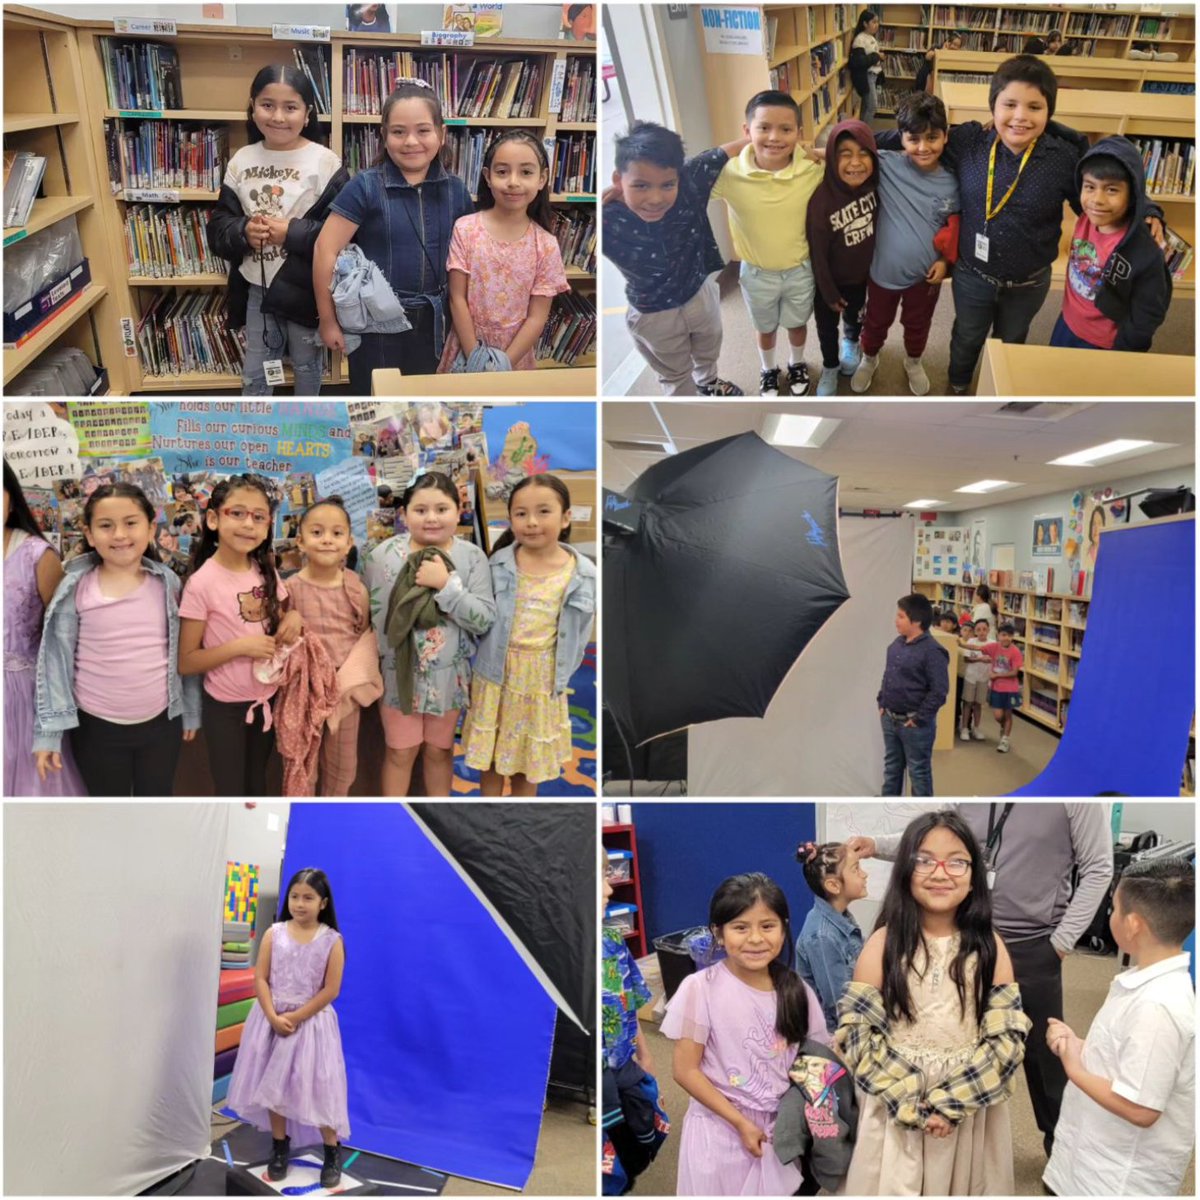 SPRING Pictures!!🌼☘️🌻Lovely smiles, beautiful day to take our Spring pictures..@VistaVerdeGrizz @ASA_PolarBears @marychapagusd @OakBrownBears @GUSDEdServices @GUSDFACE @LCortezGUSD @Zjgalvan